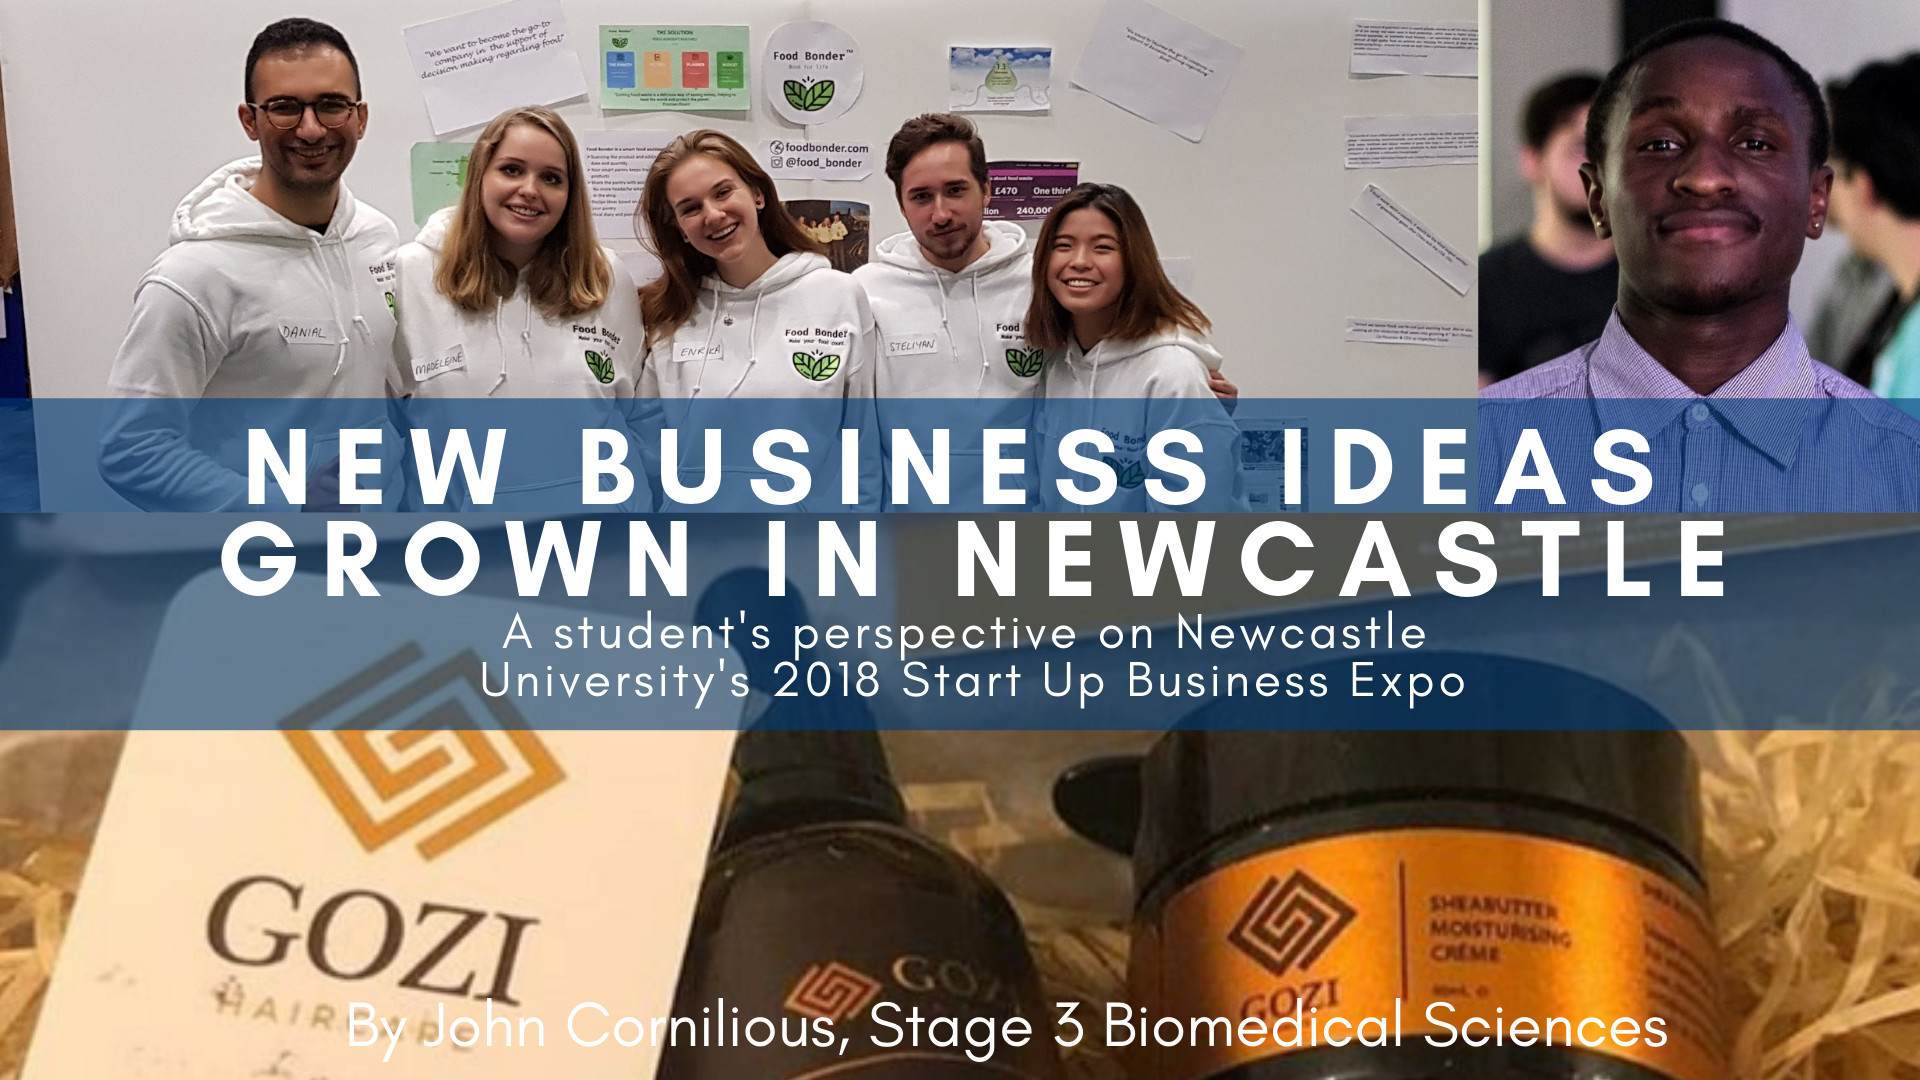 New business ideas grown in Newcastle